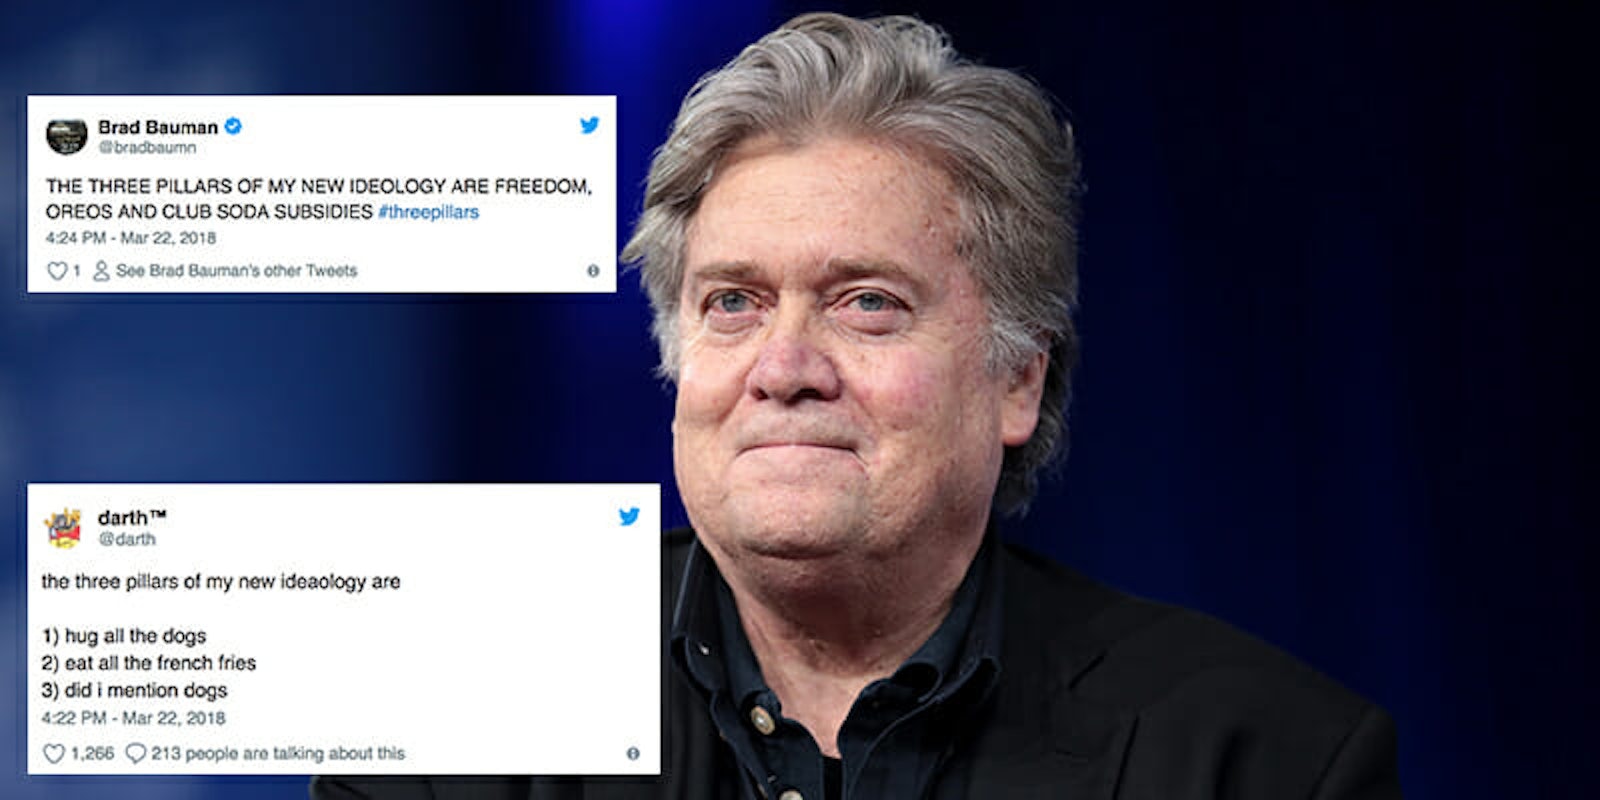 Steve Bannon inspired a meme when he announced the 'three pillars' of his new political outlook.